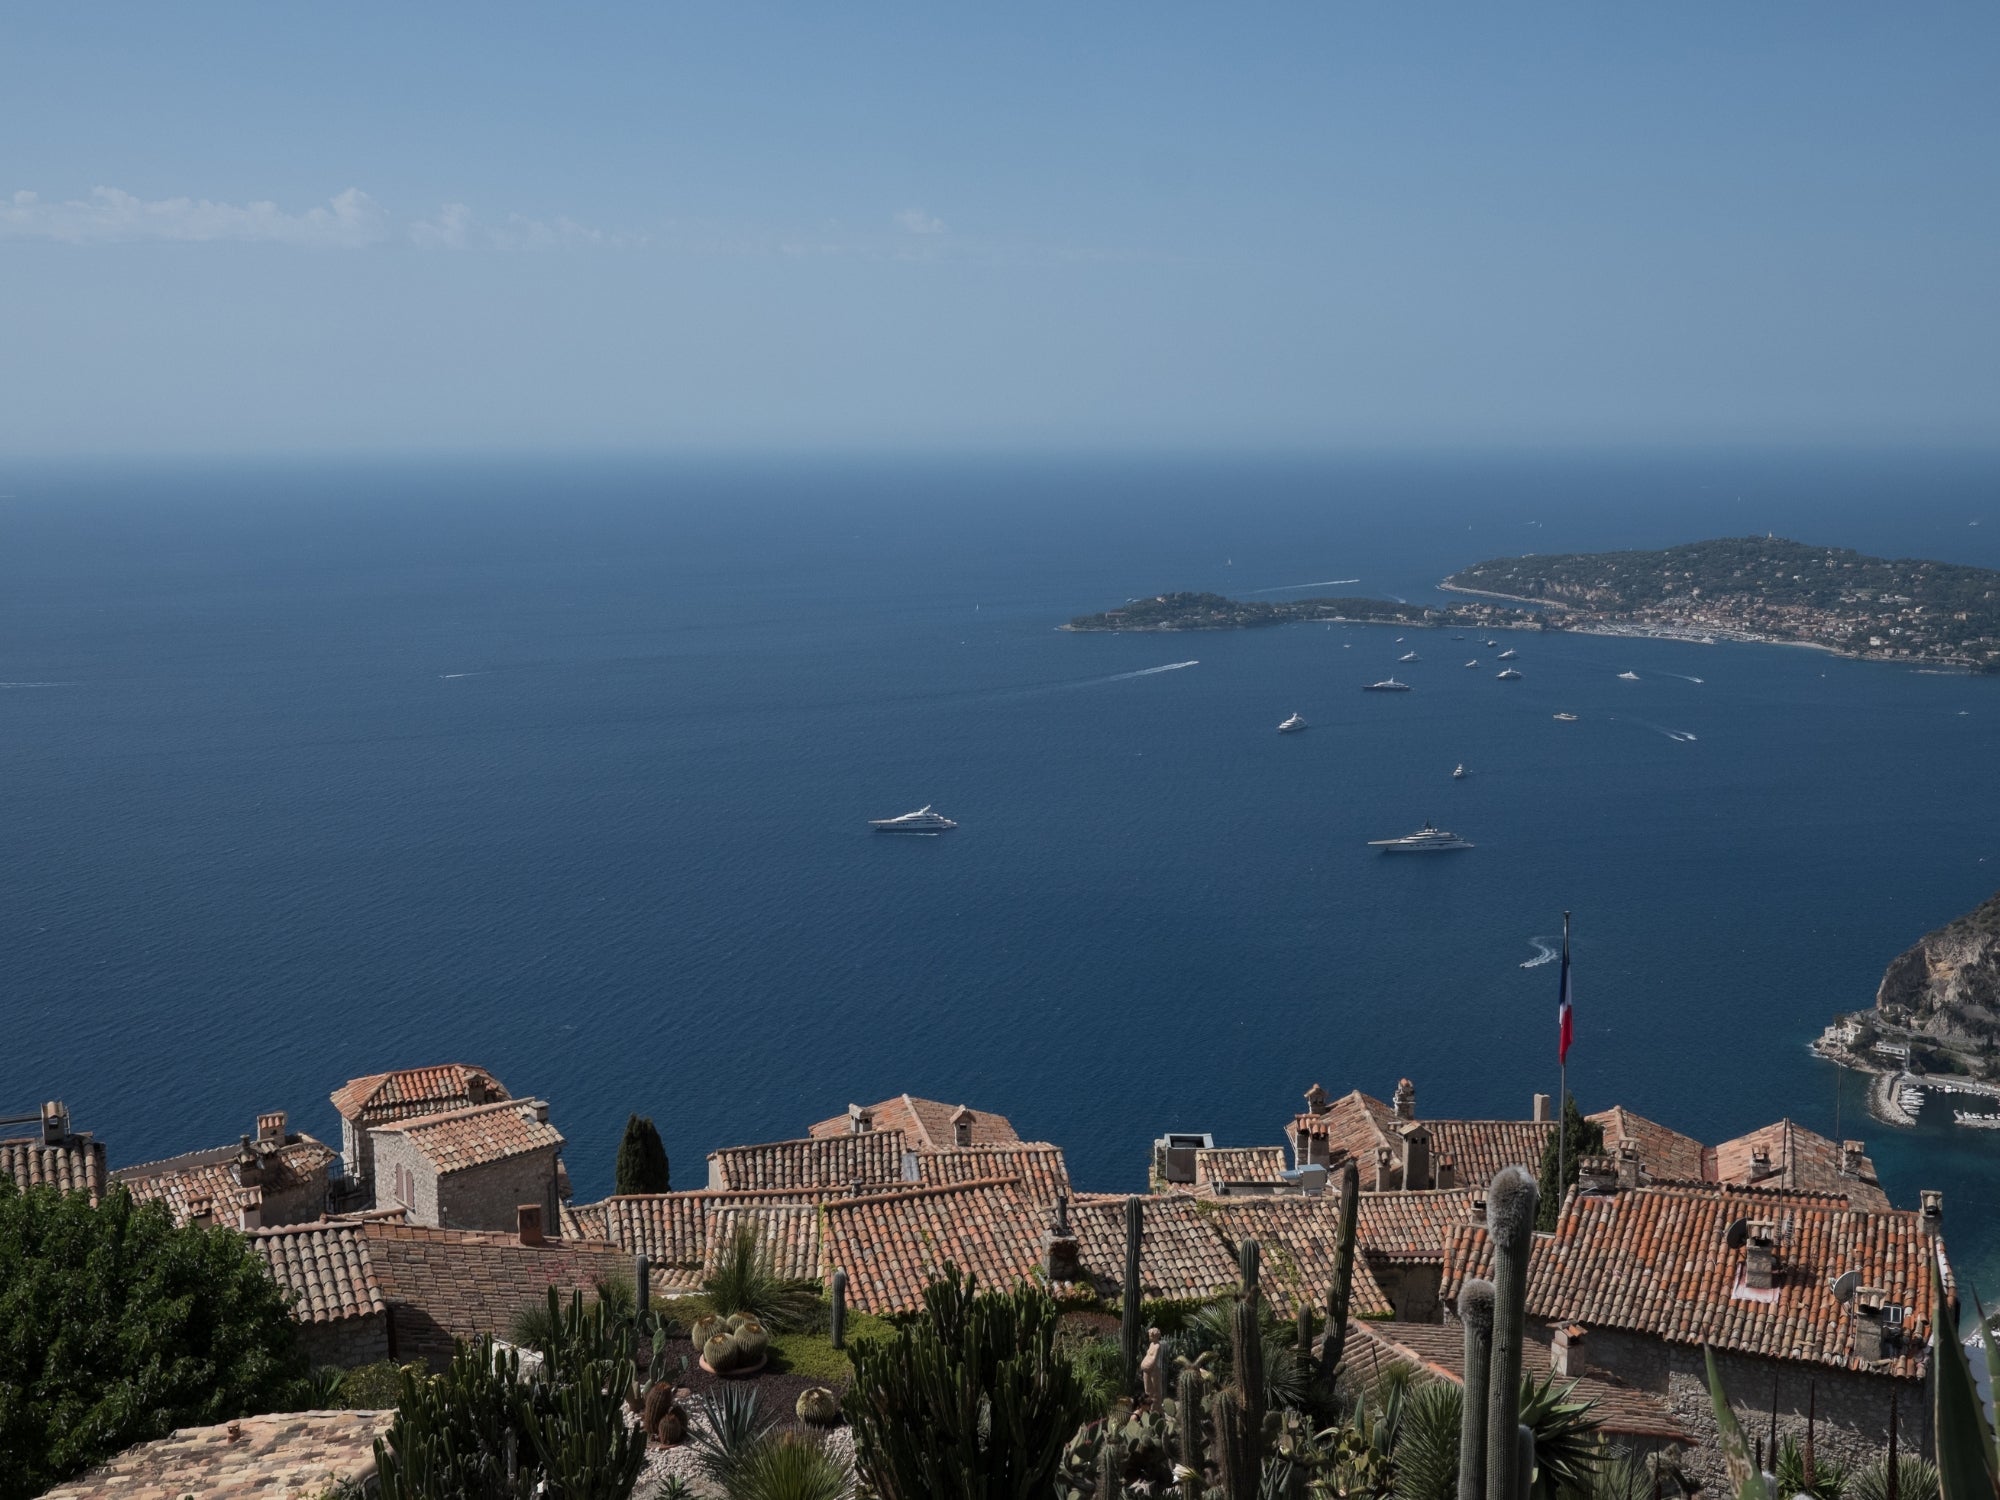 Views of the Mediterranean and the yachts from the Exotic Garden in Èze, a medieval village on the French Riviera